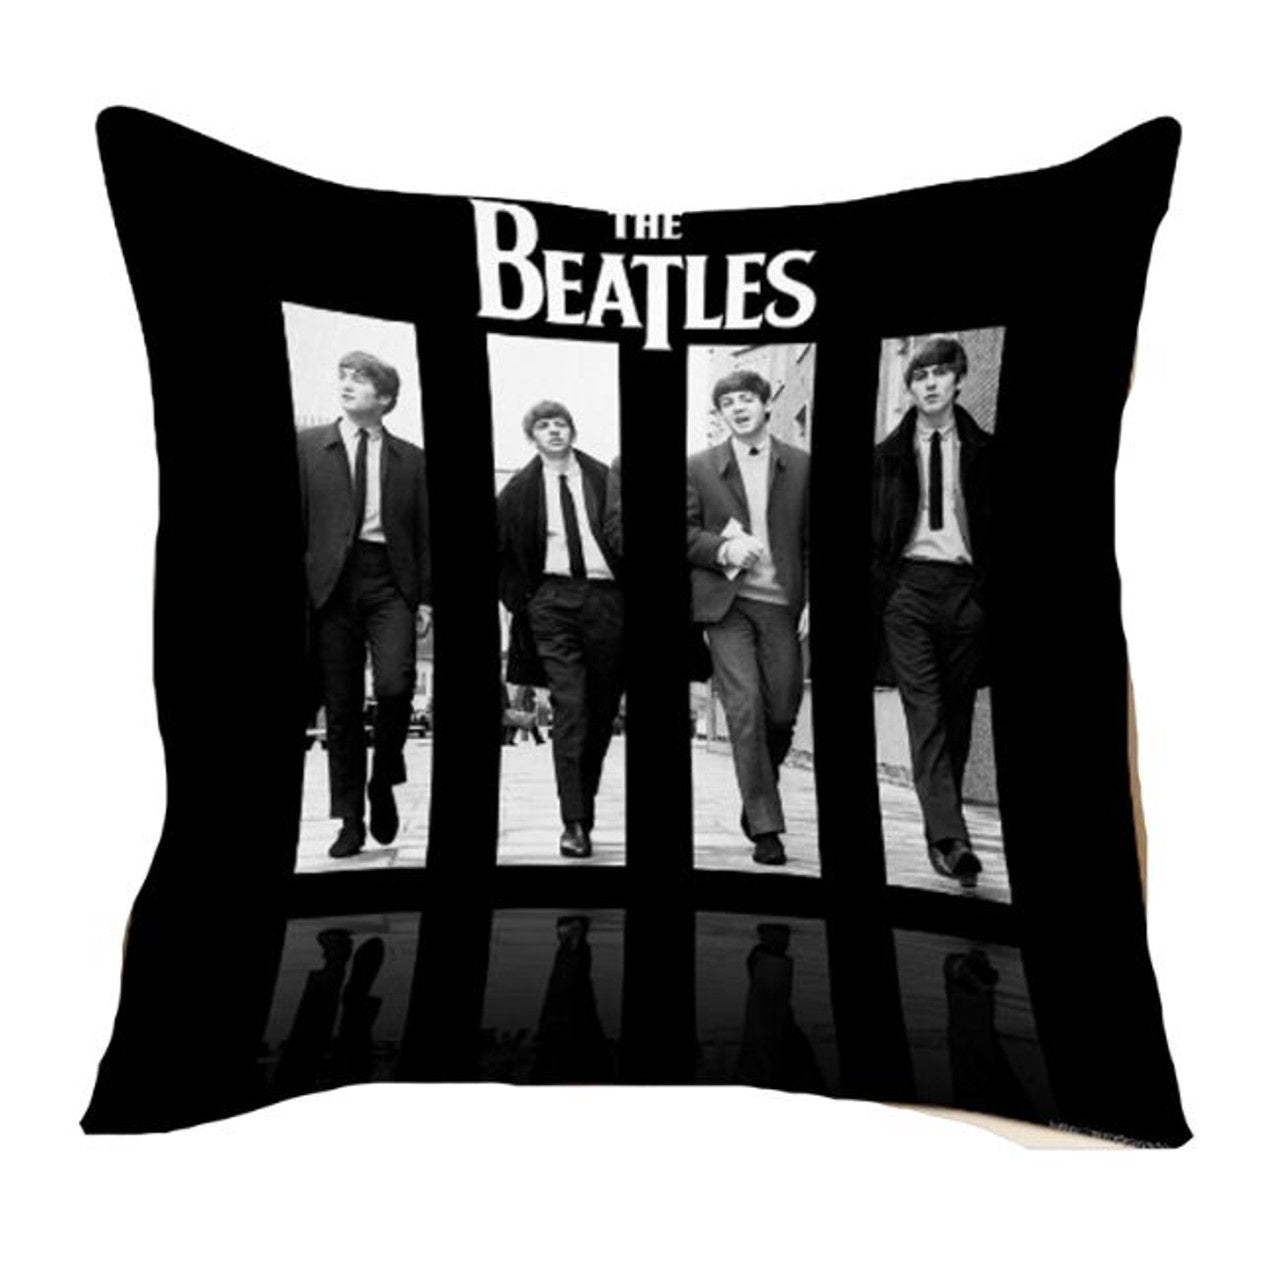 The Beatles - 60'S Black & White Images Cushion Throw Pillow